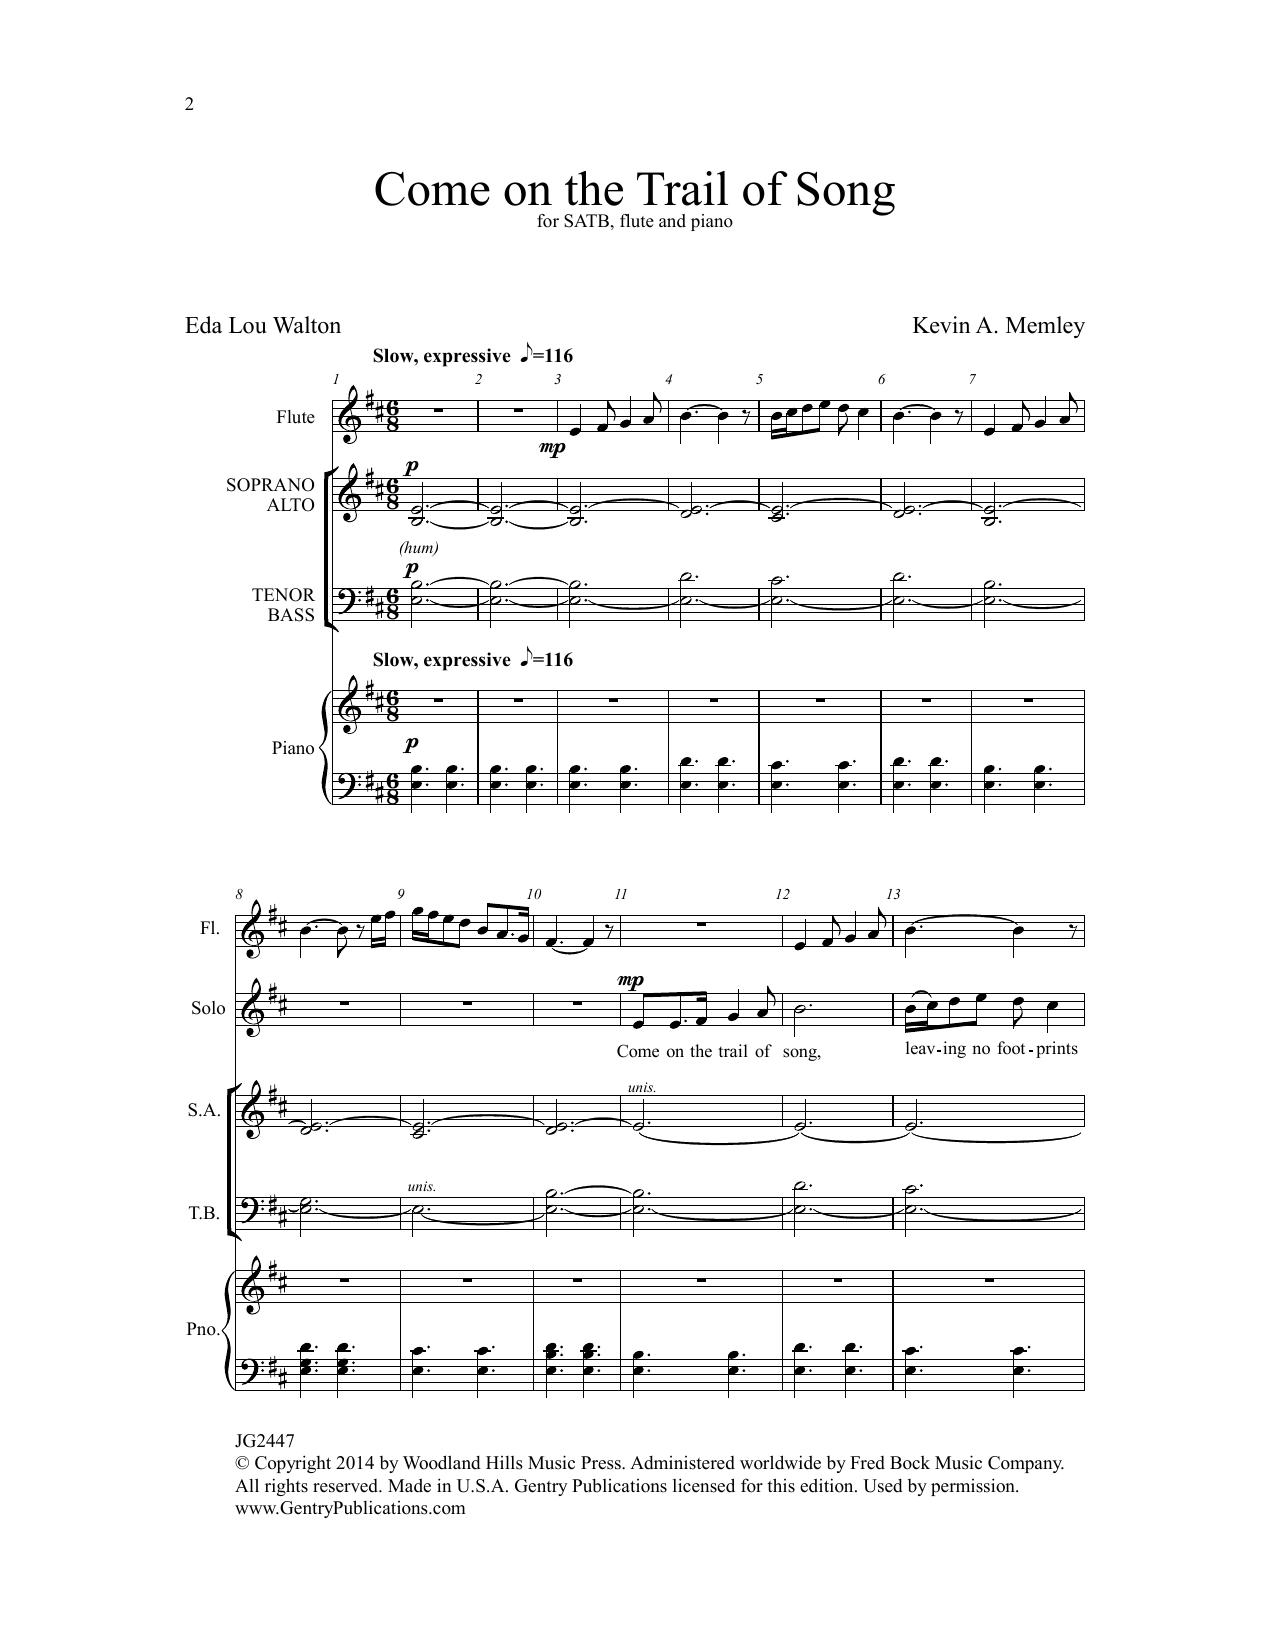 Download Kevin A. Memley Come on the Trail of Song Sheet Music